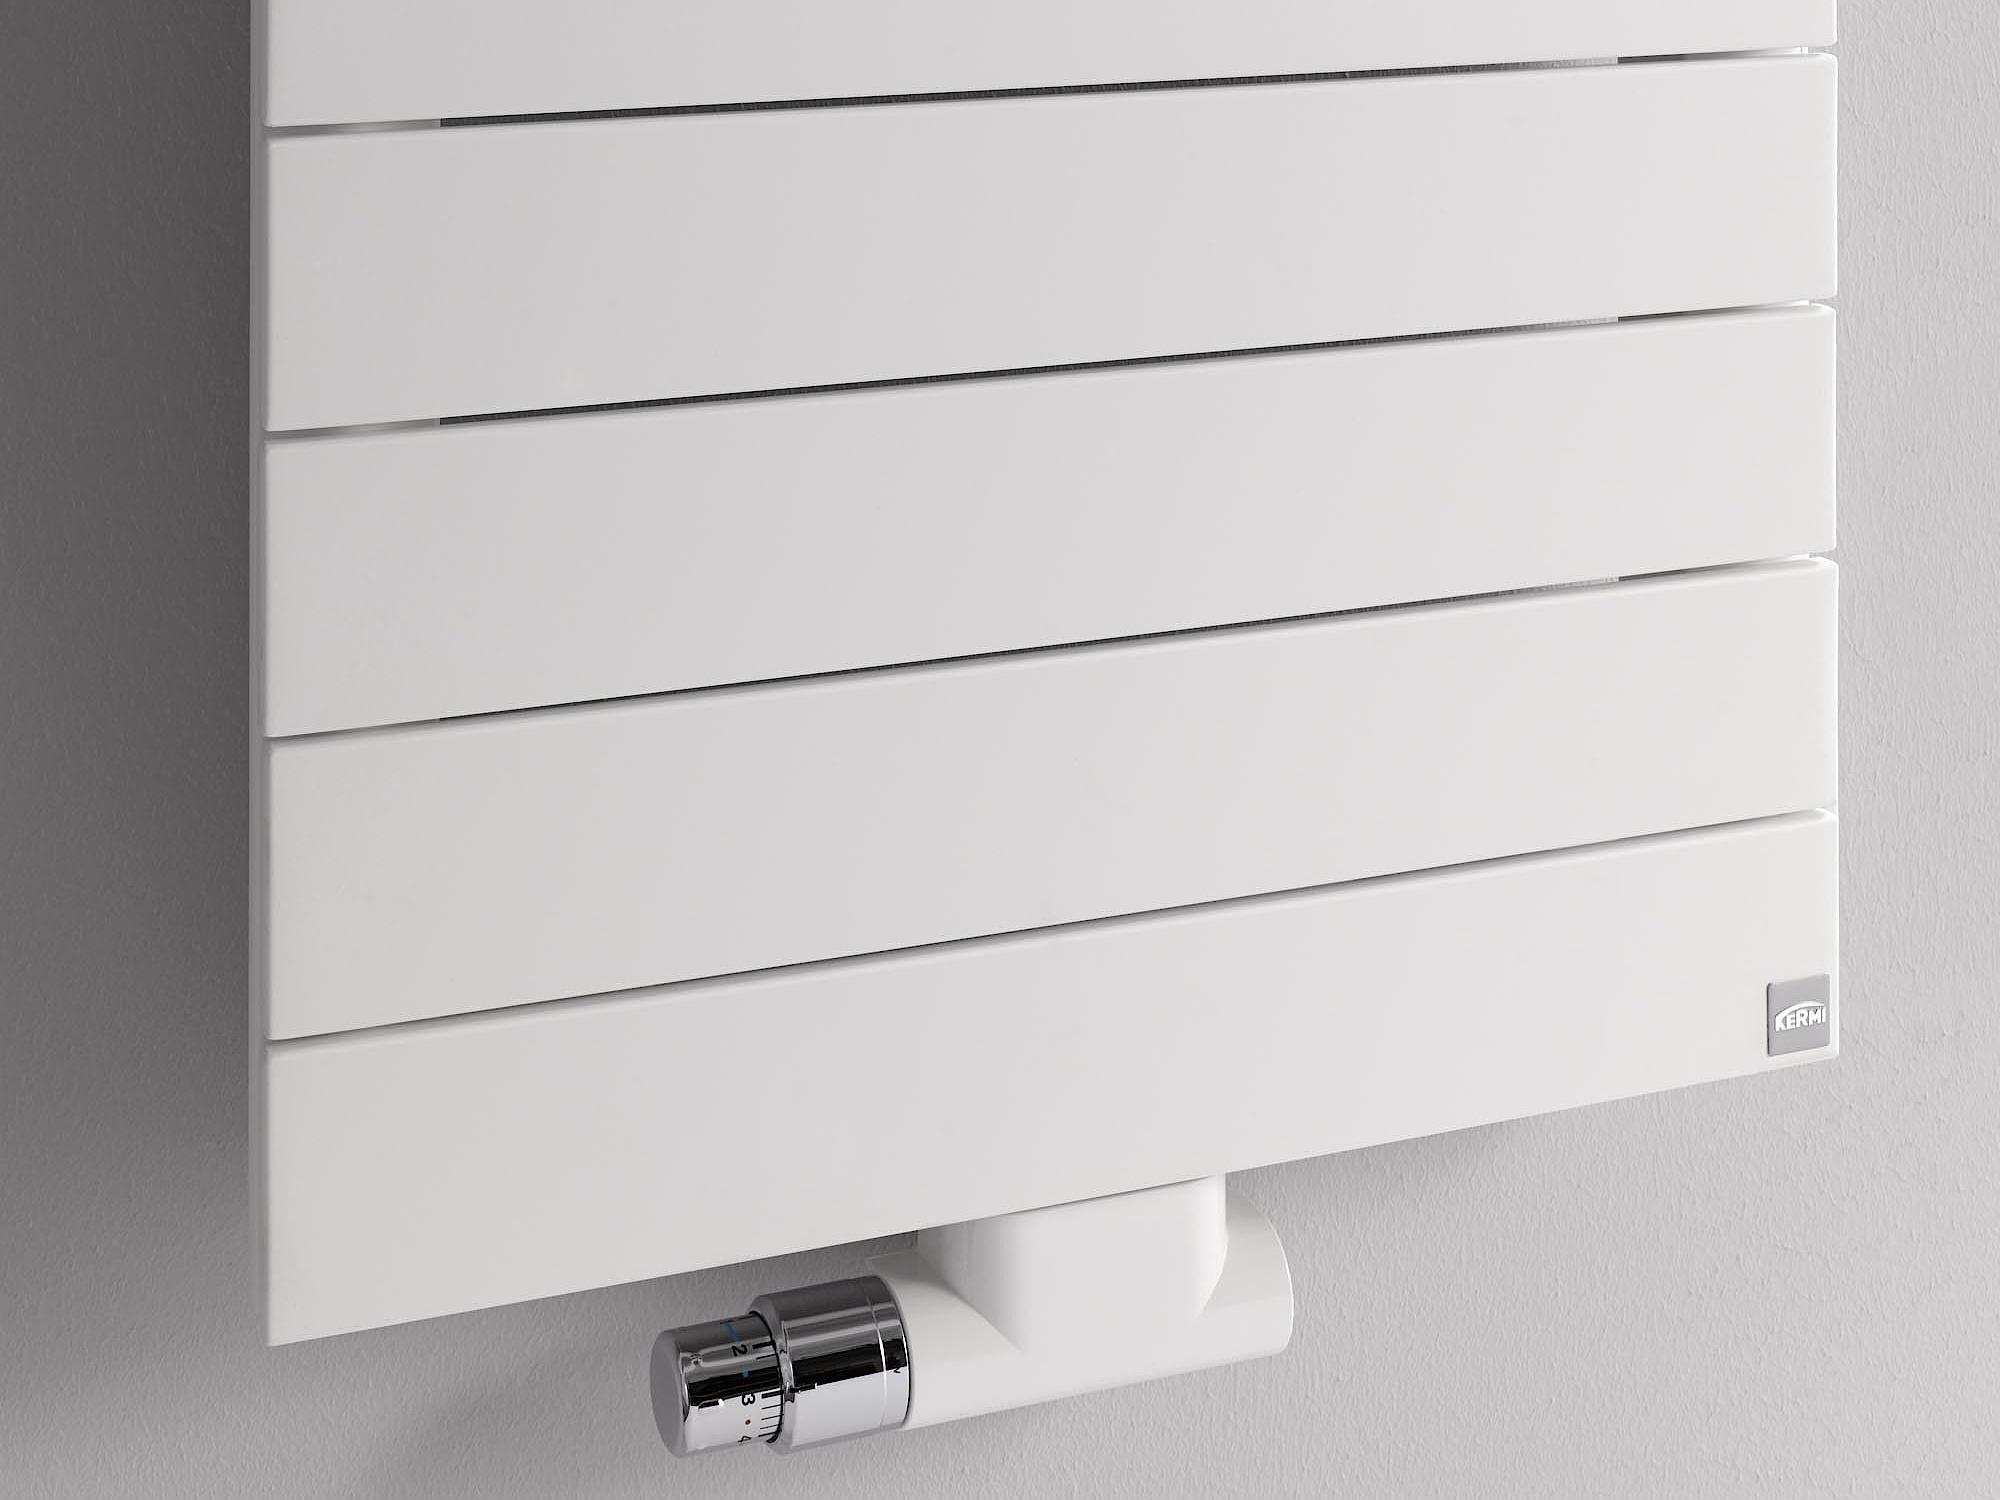 Kermi Tabeo design and bathroom radiators with 50 mm centre connection to make planning easier.